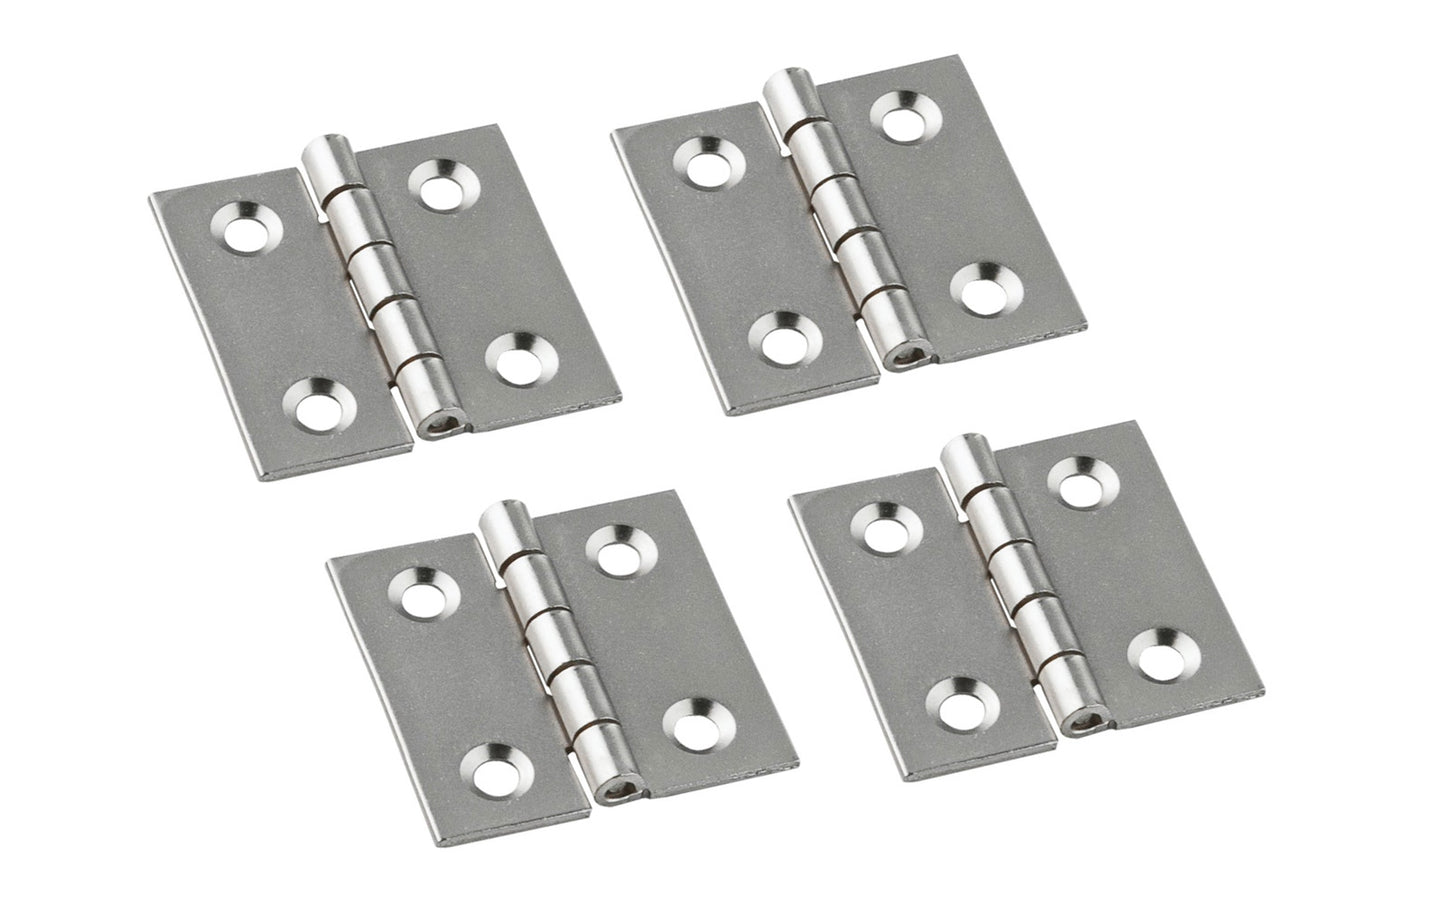 1" x 1" Satin Nickel Hinges ~ 4 Pack ~ These miniature hinges are designed to add a decorative appearance to small chests, jewelry boxes, craft projects, etc. Made of steel material with a satin nickel finish. 1" high x 1" wide. Surface mount. Non-removable pin. Sold as 4 hinges in pack. National Hardware Model No. N211-013. 886780014211. 4 Pack